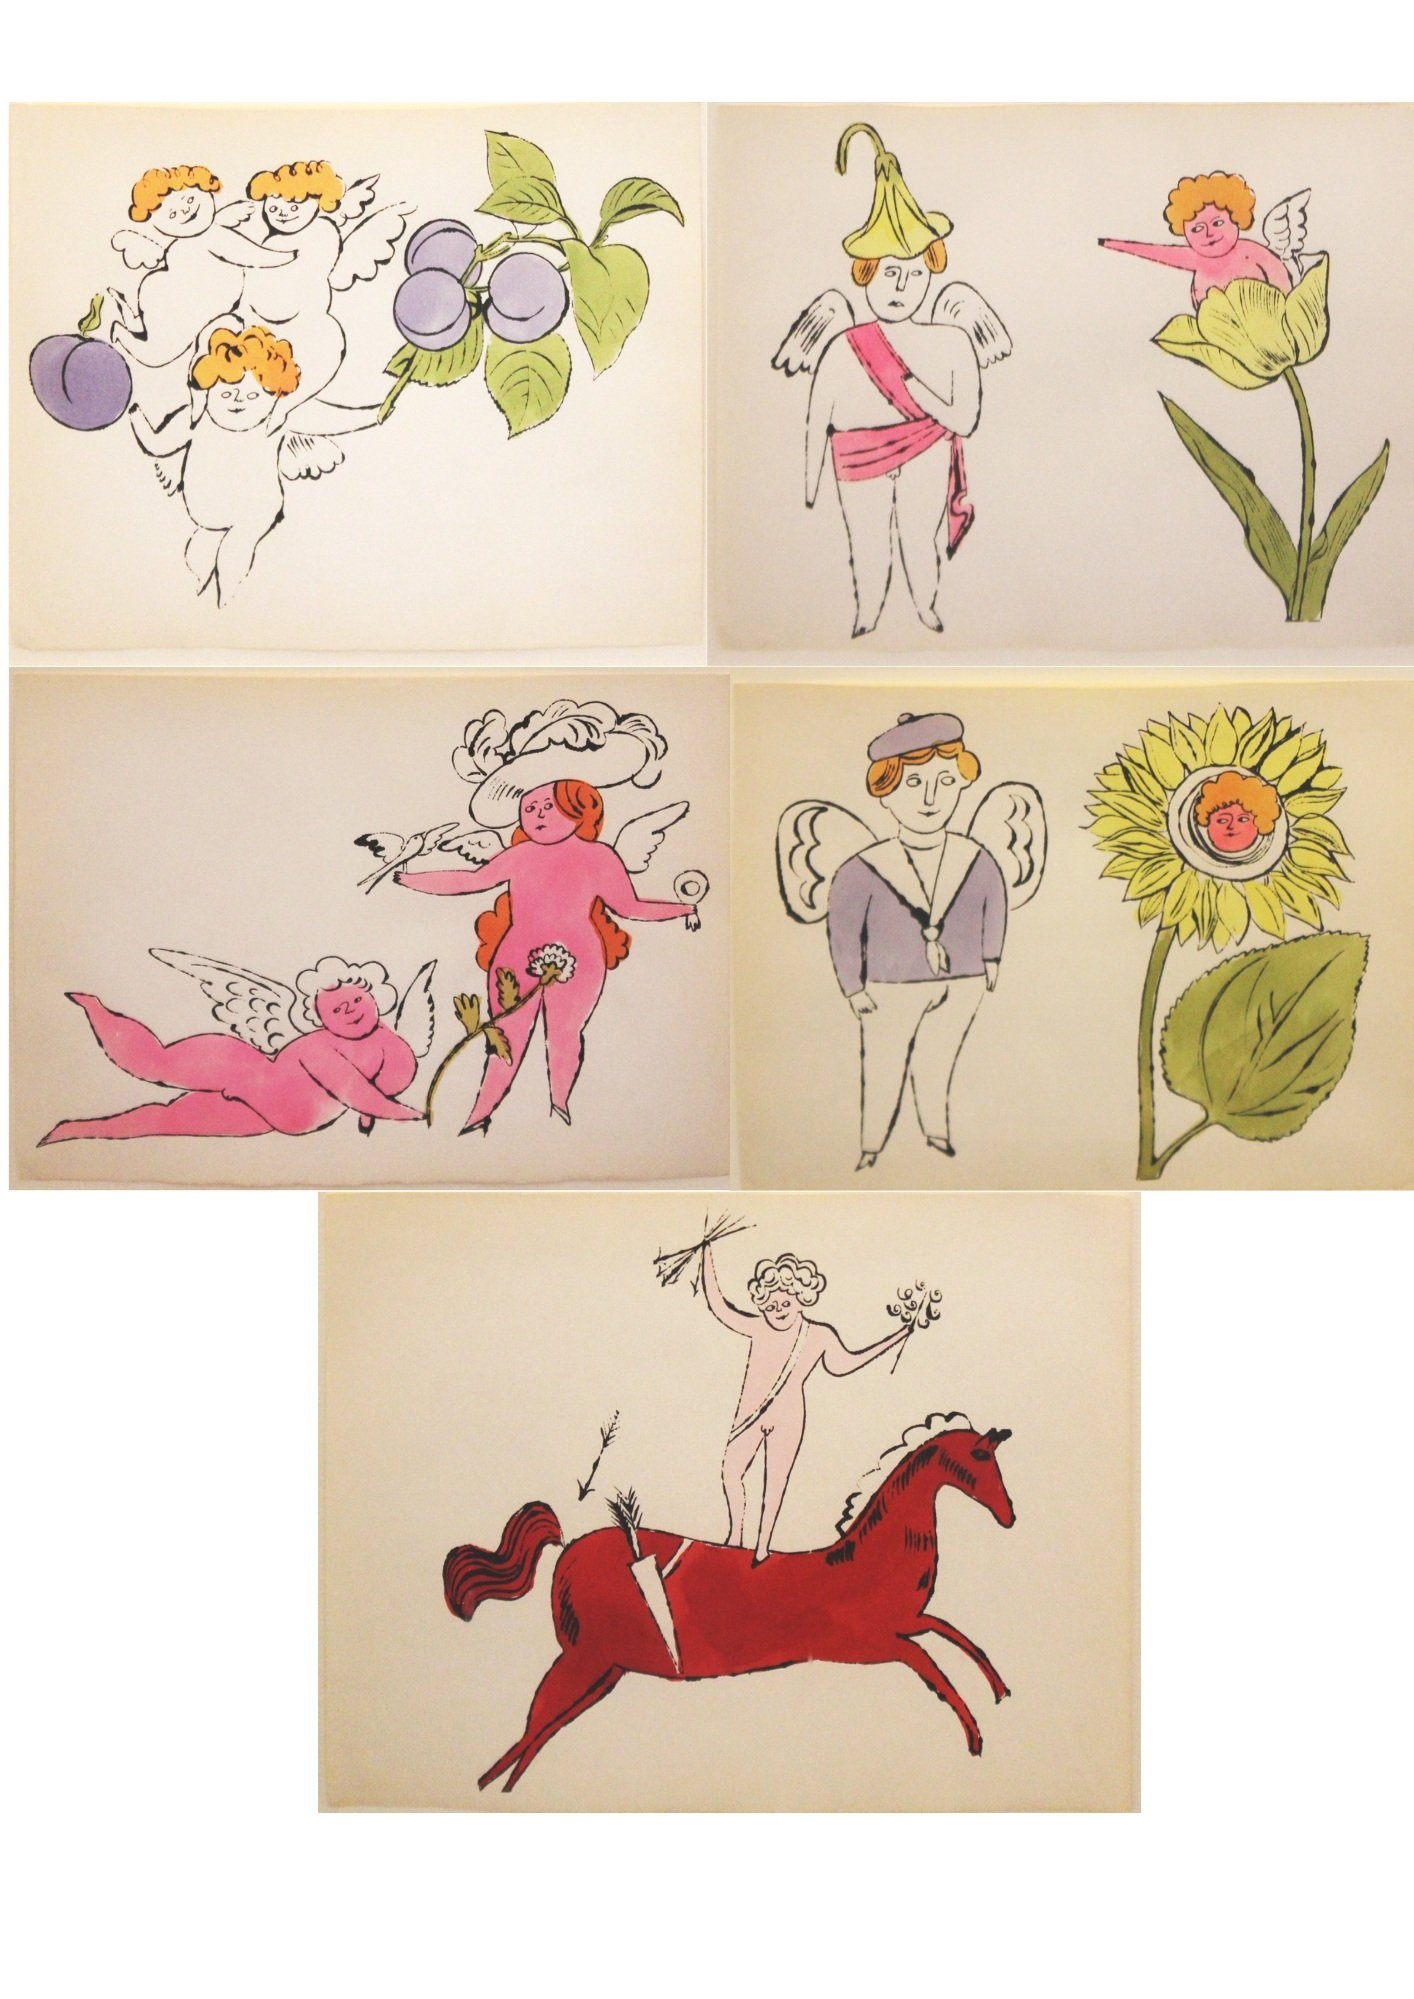 Artwork by Andy Warhol, Five Works from the (In the Bottom of My Garden), Made of hand-colored with watercolor